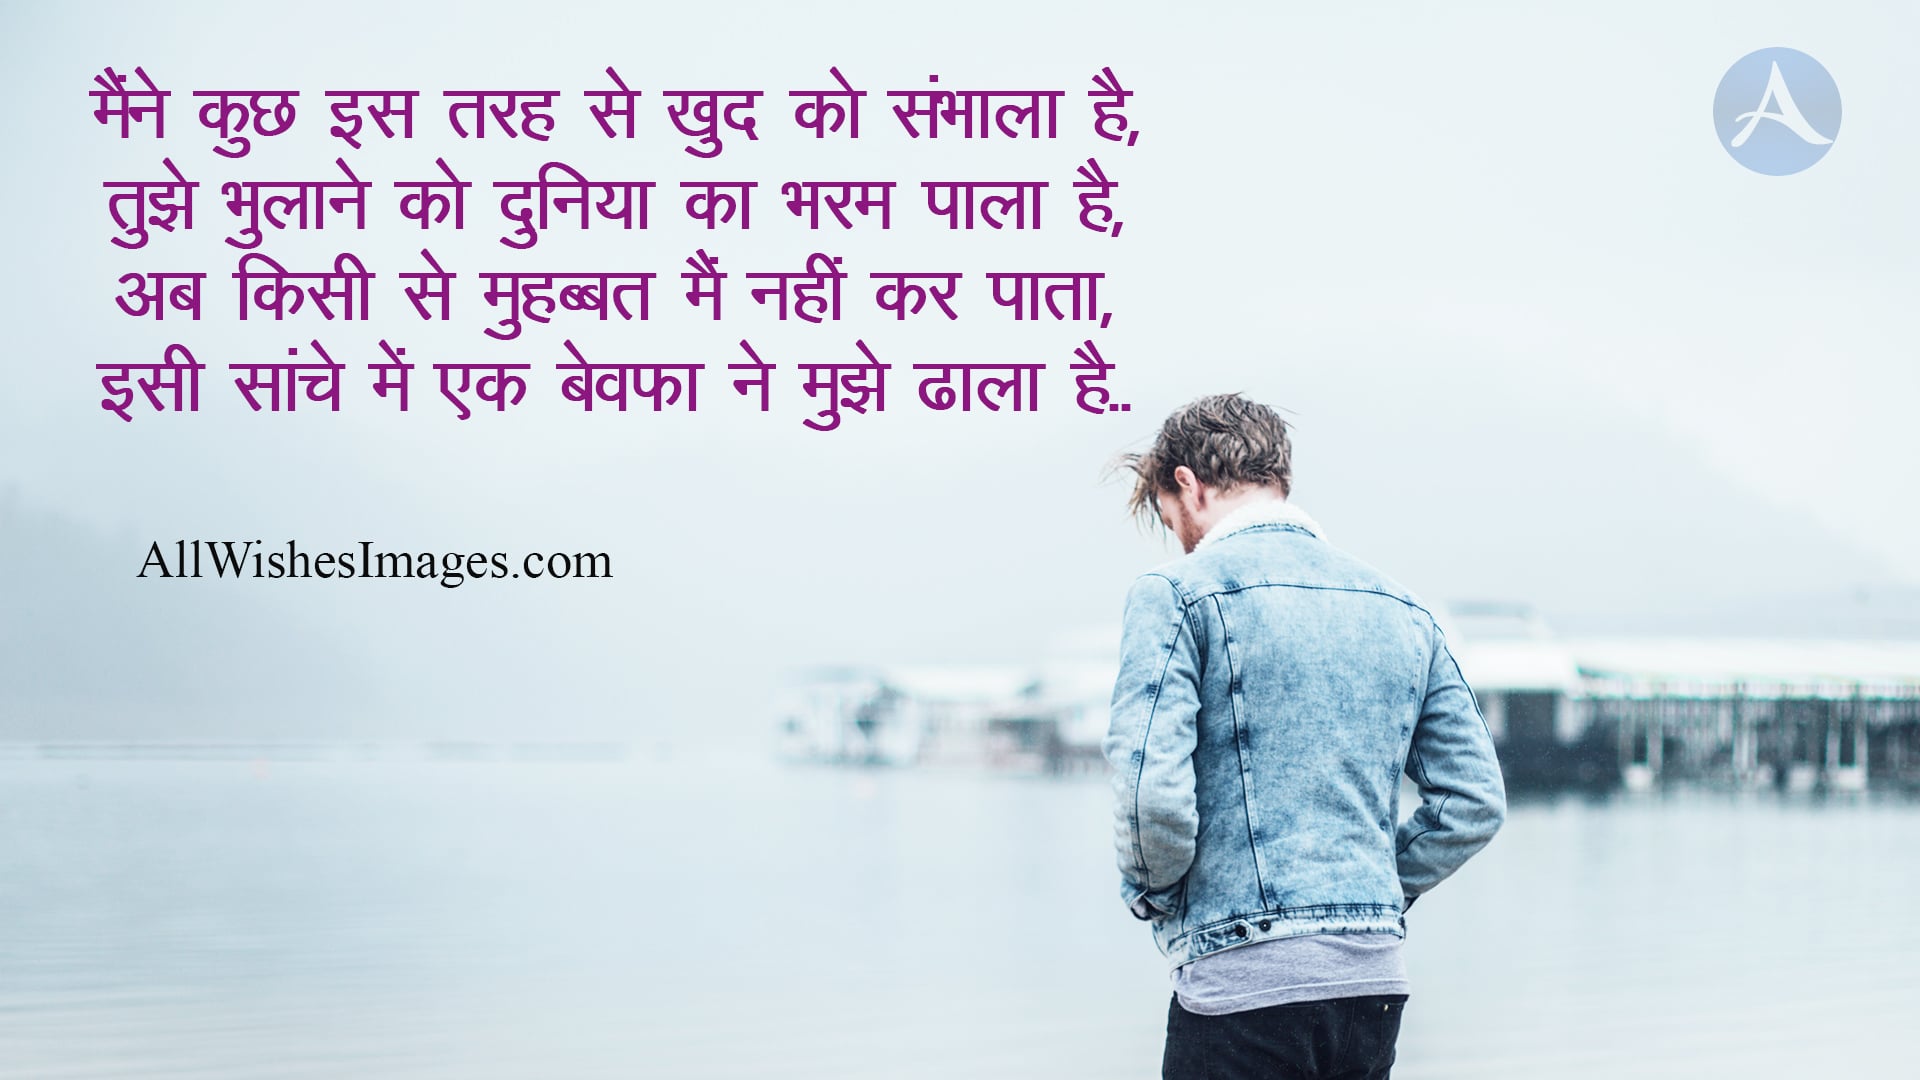 Bewafa Shayari Image Wallpapers - All Wishes Images - Images for WhatsApp